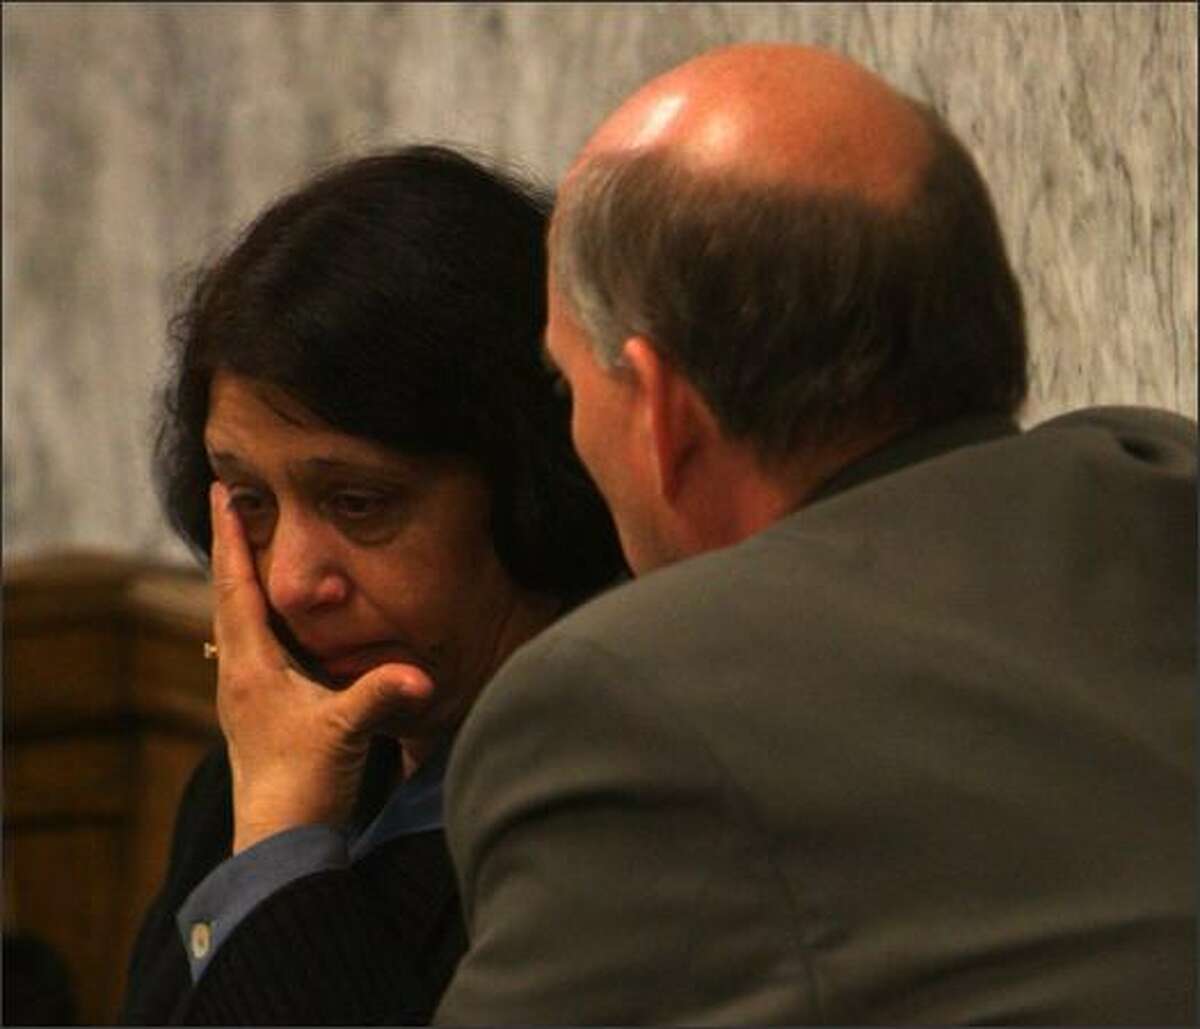 Naveed Haq's mother, Nahida Haq, consults defensive attorney C. Wesley Richards after testifying on behalf of her son, who is on trial for the shootings at the Jewish Federation of Greater Seattle.